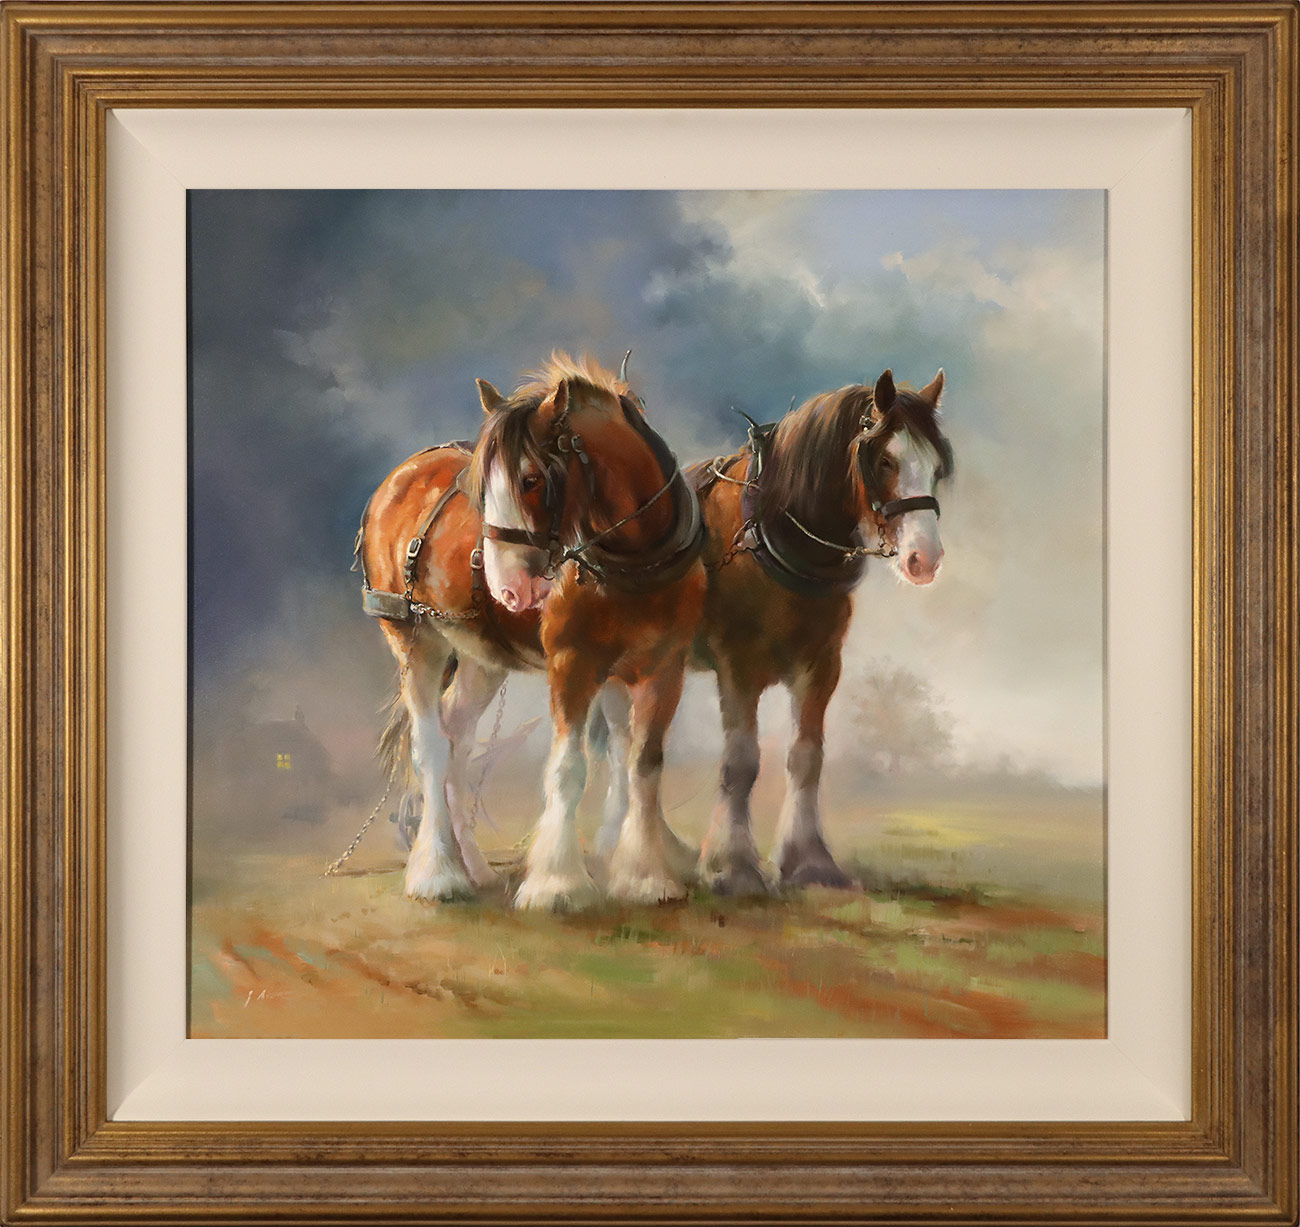 Jacqueline Stanhope, Original oil painting on canvas, Shire Horses Click to enlarge